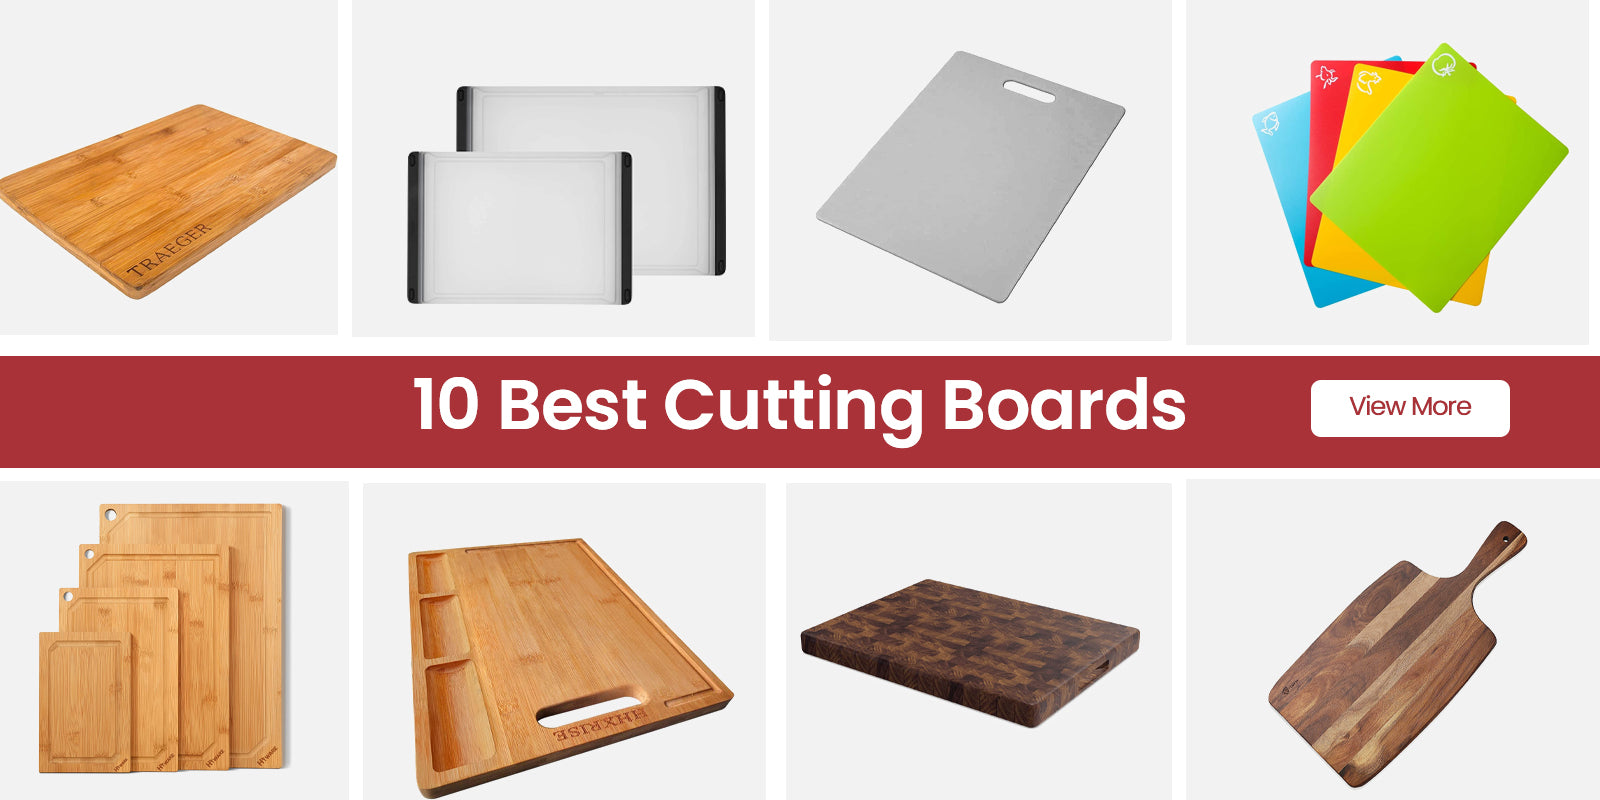 The 8 Best Cutting Boards in 2023, According to Experts